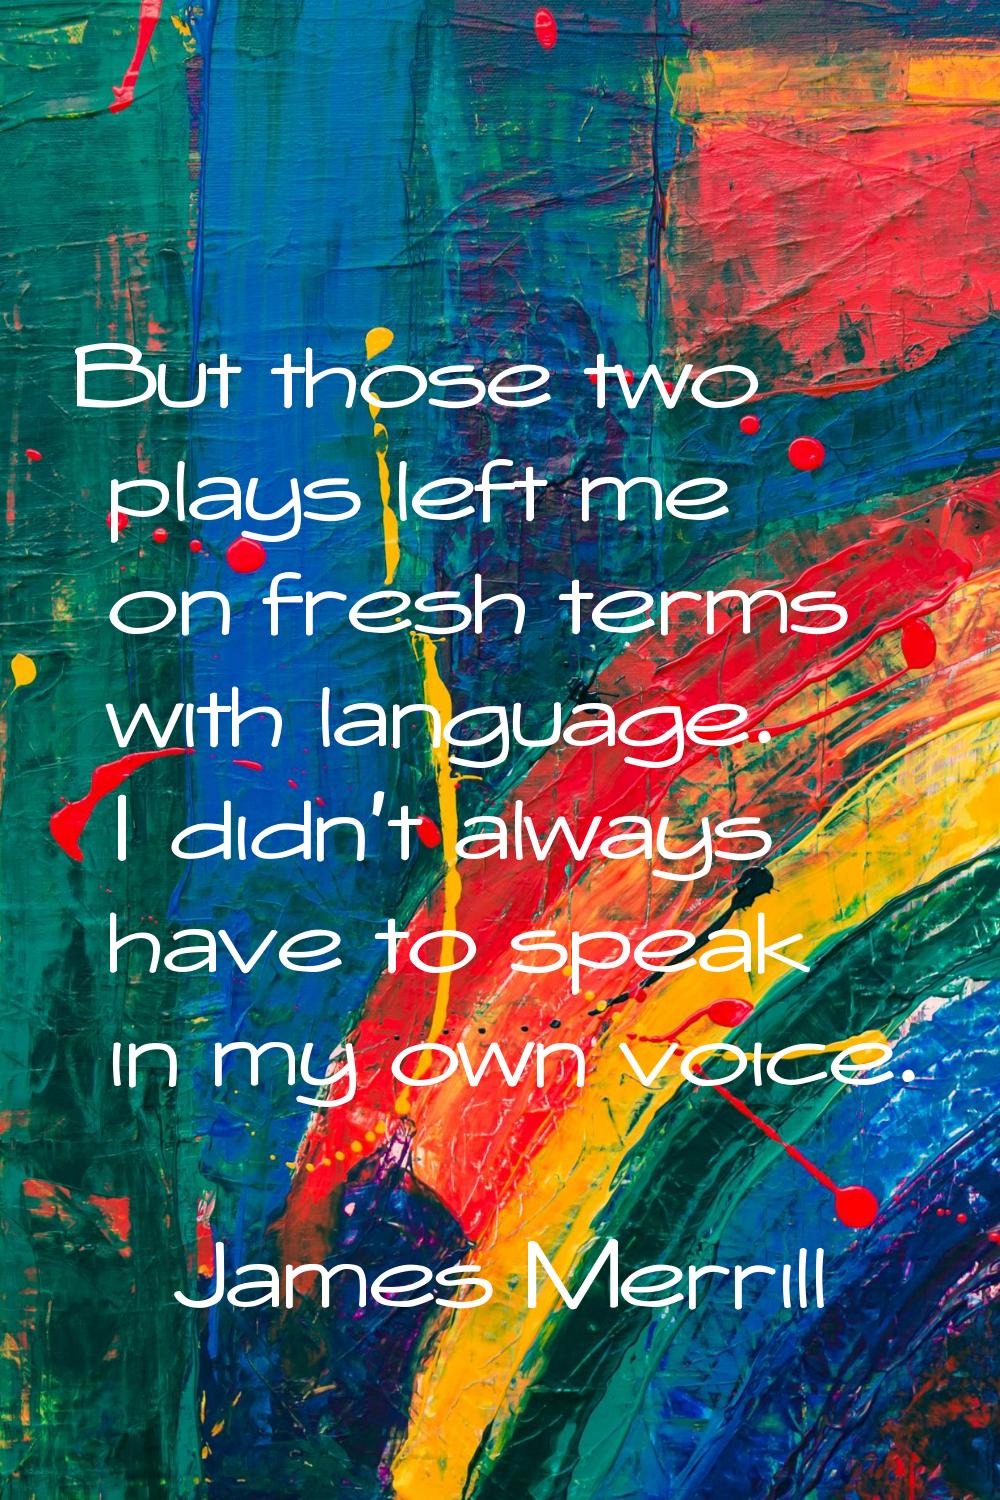 But those two plays left me on fresh terms with language. I didn't always have to speak in my own v